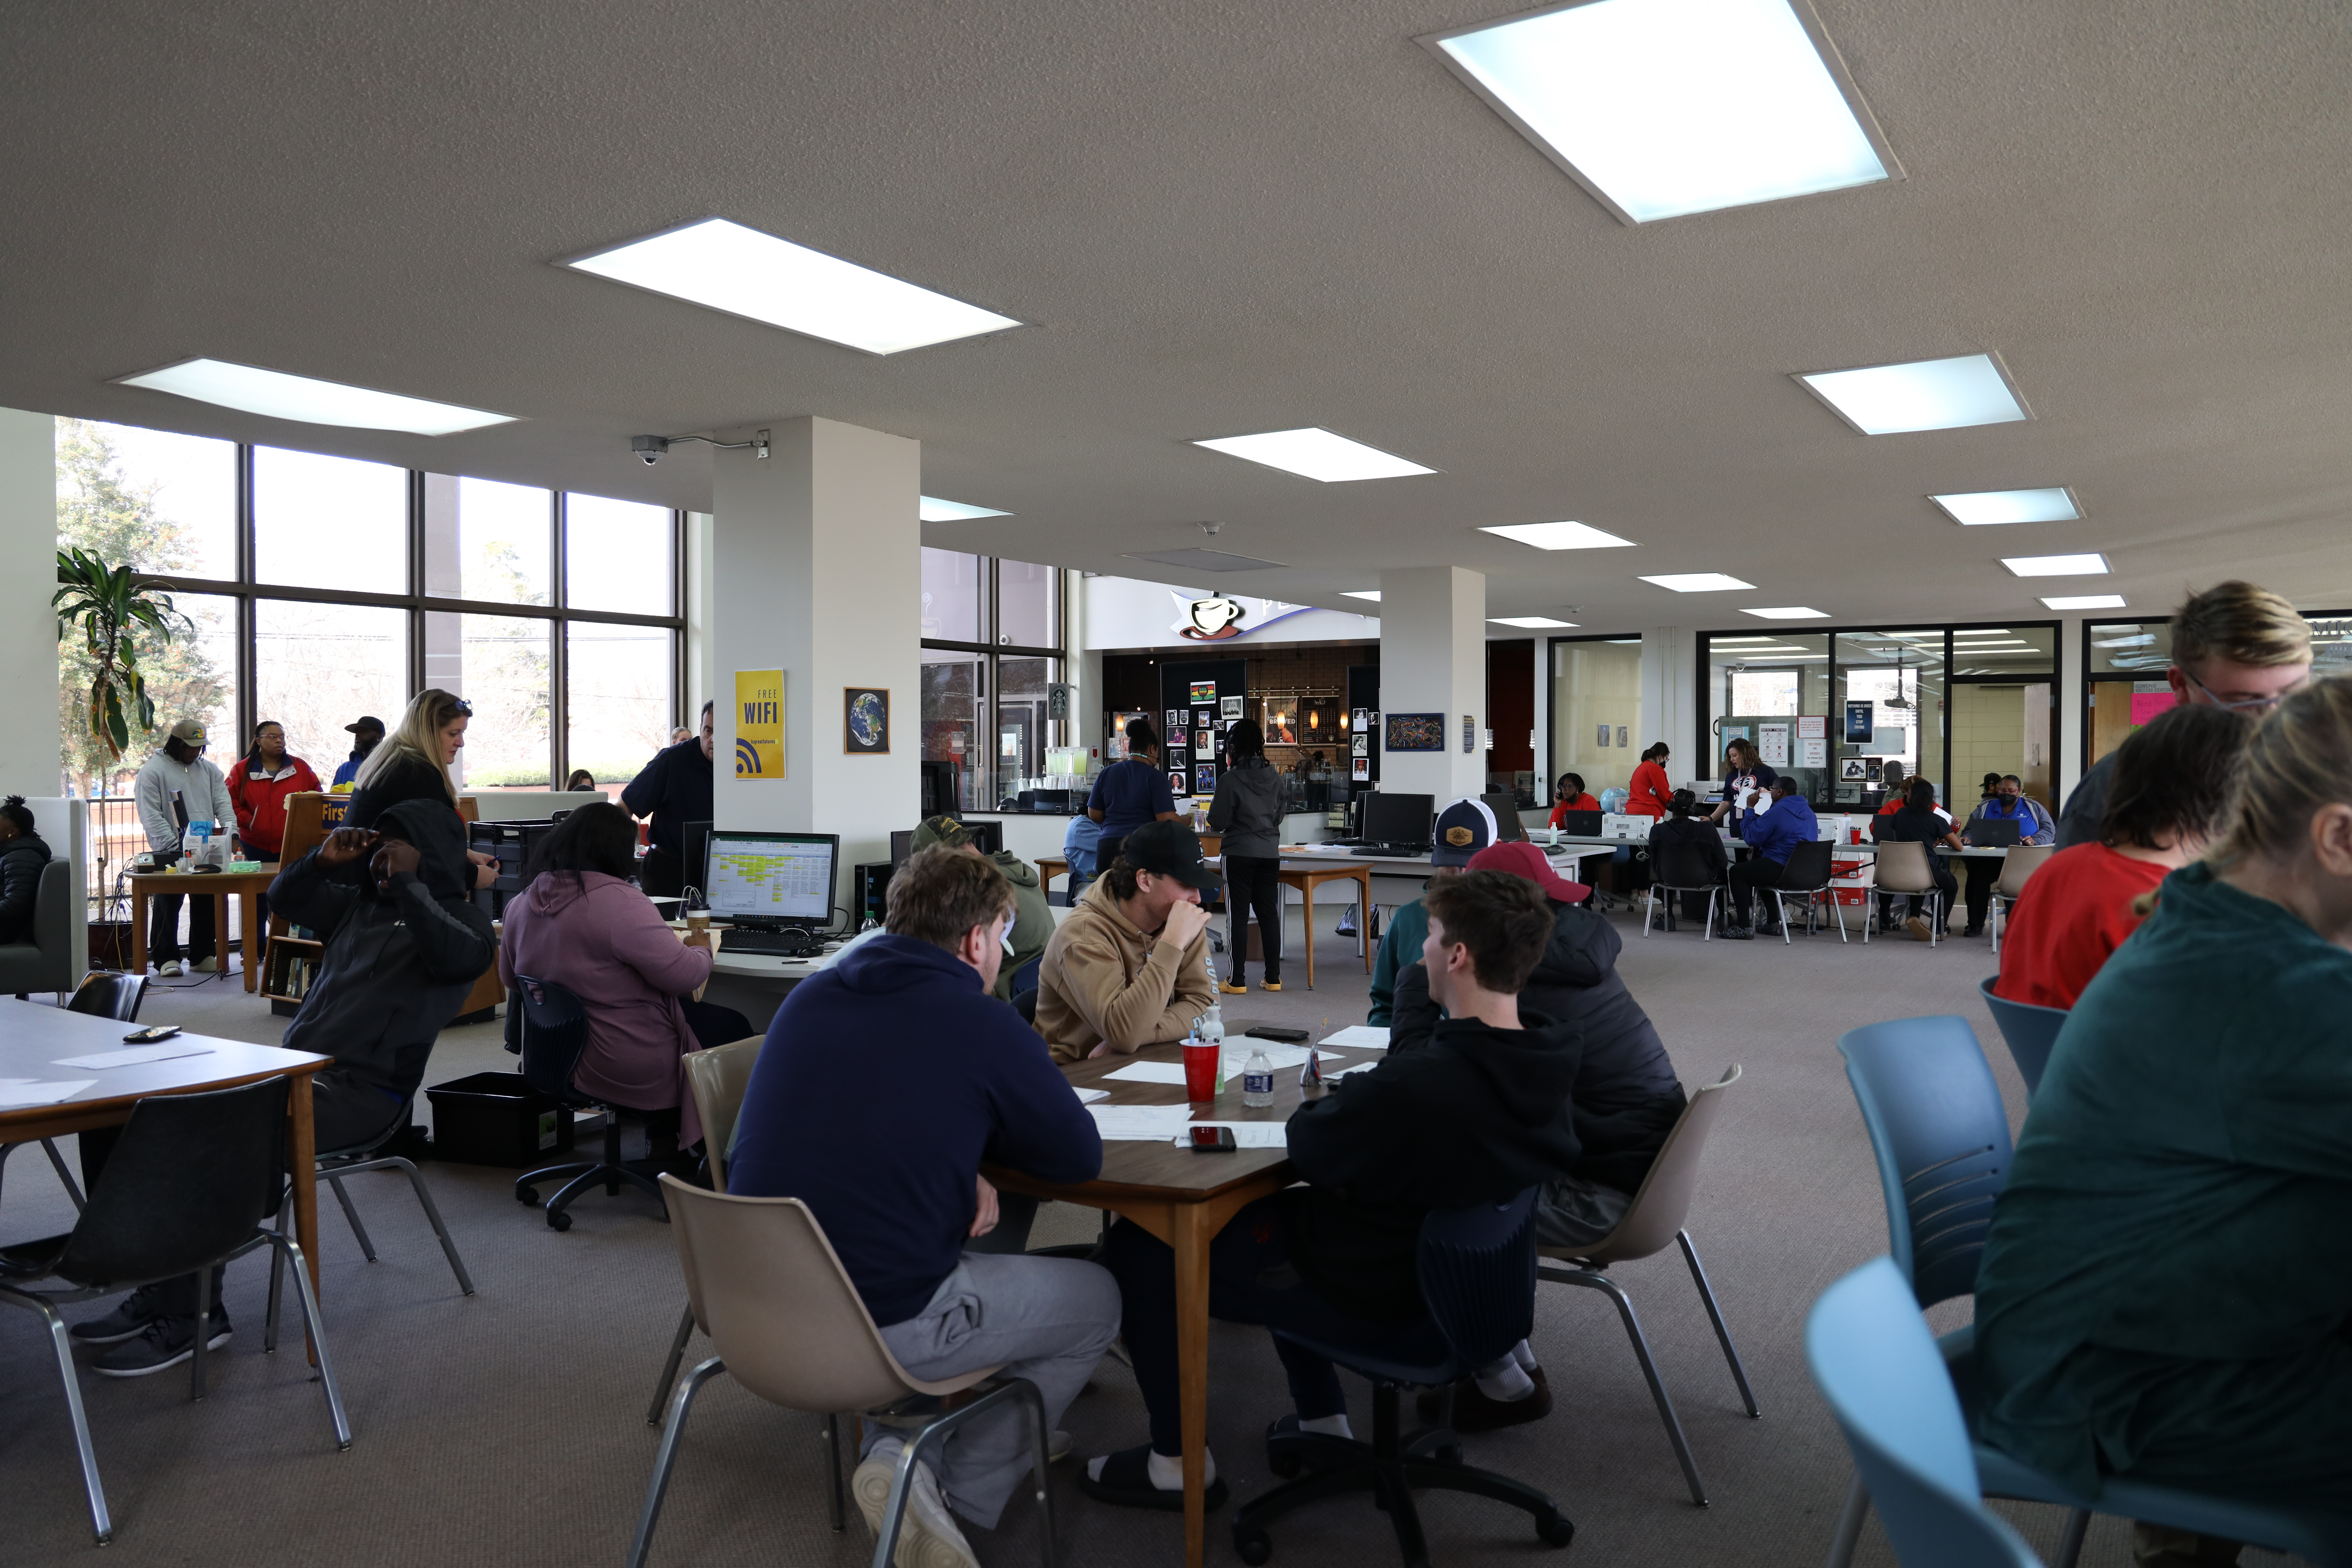 Students in the Louisburg College library during check-in.